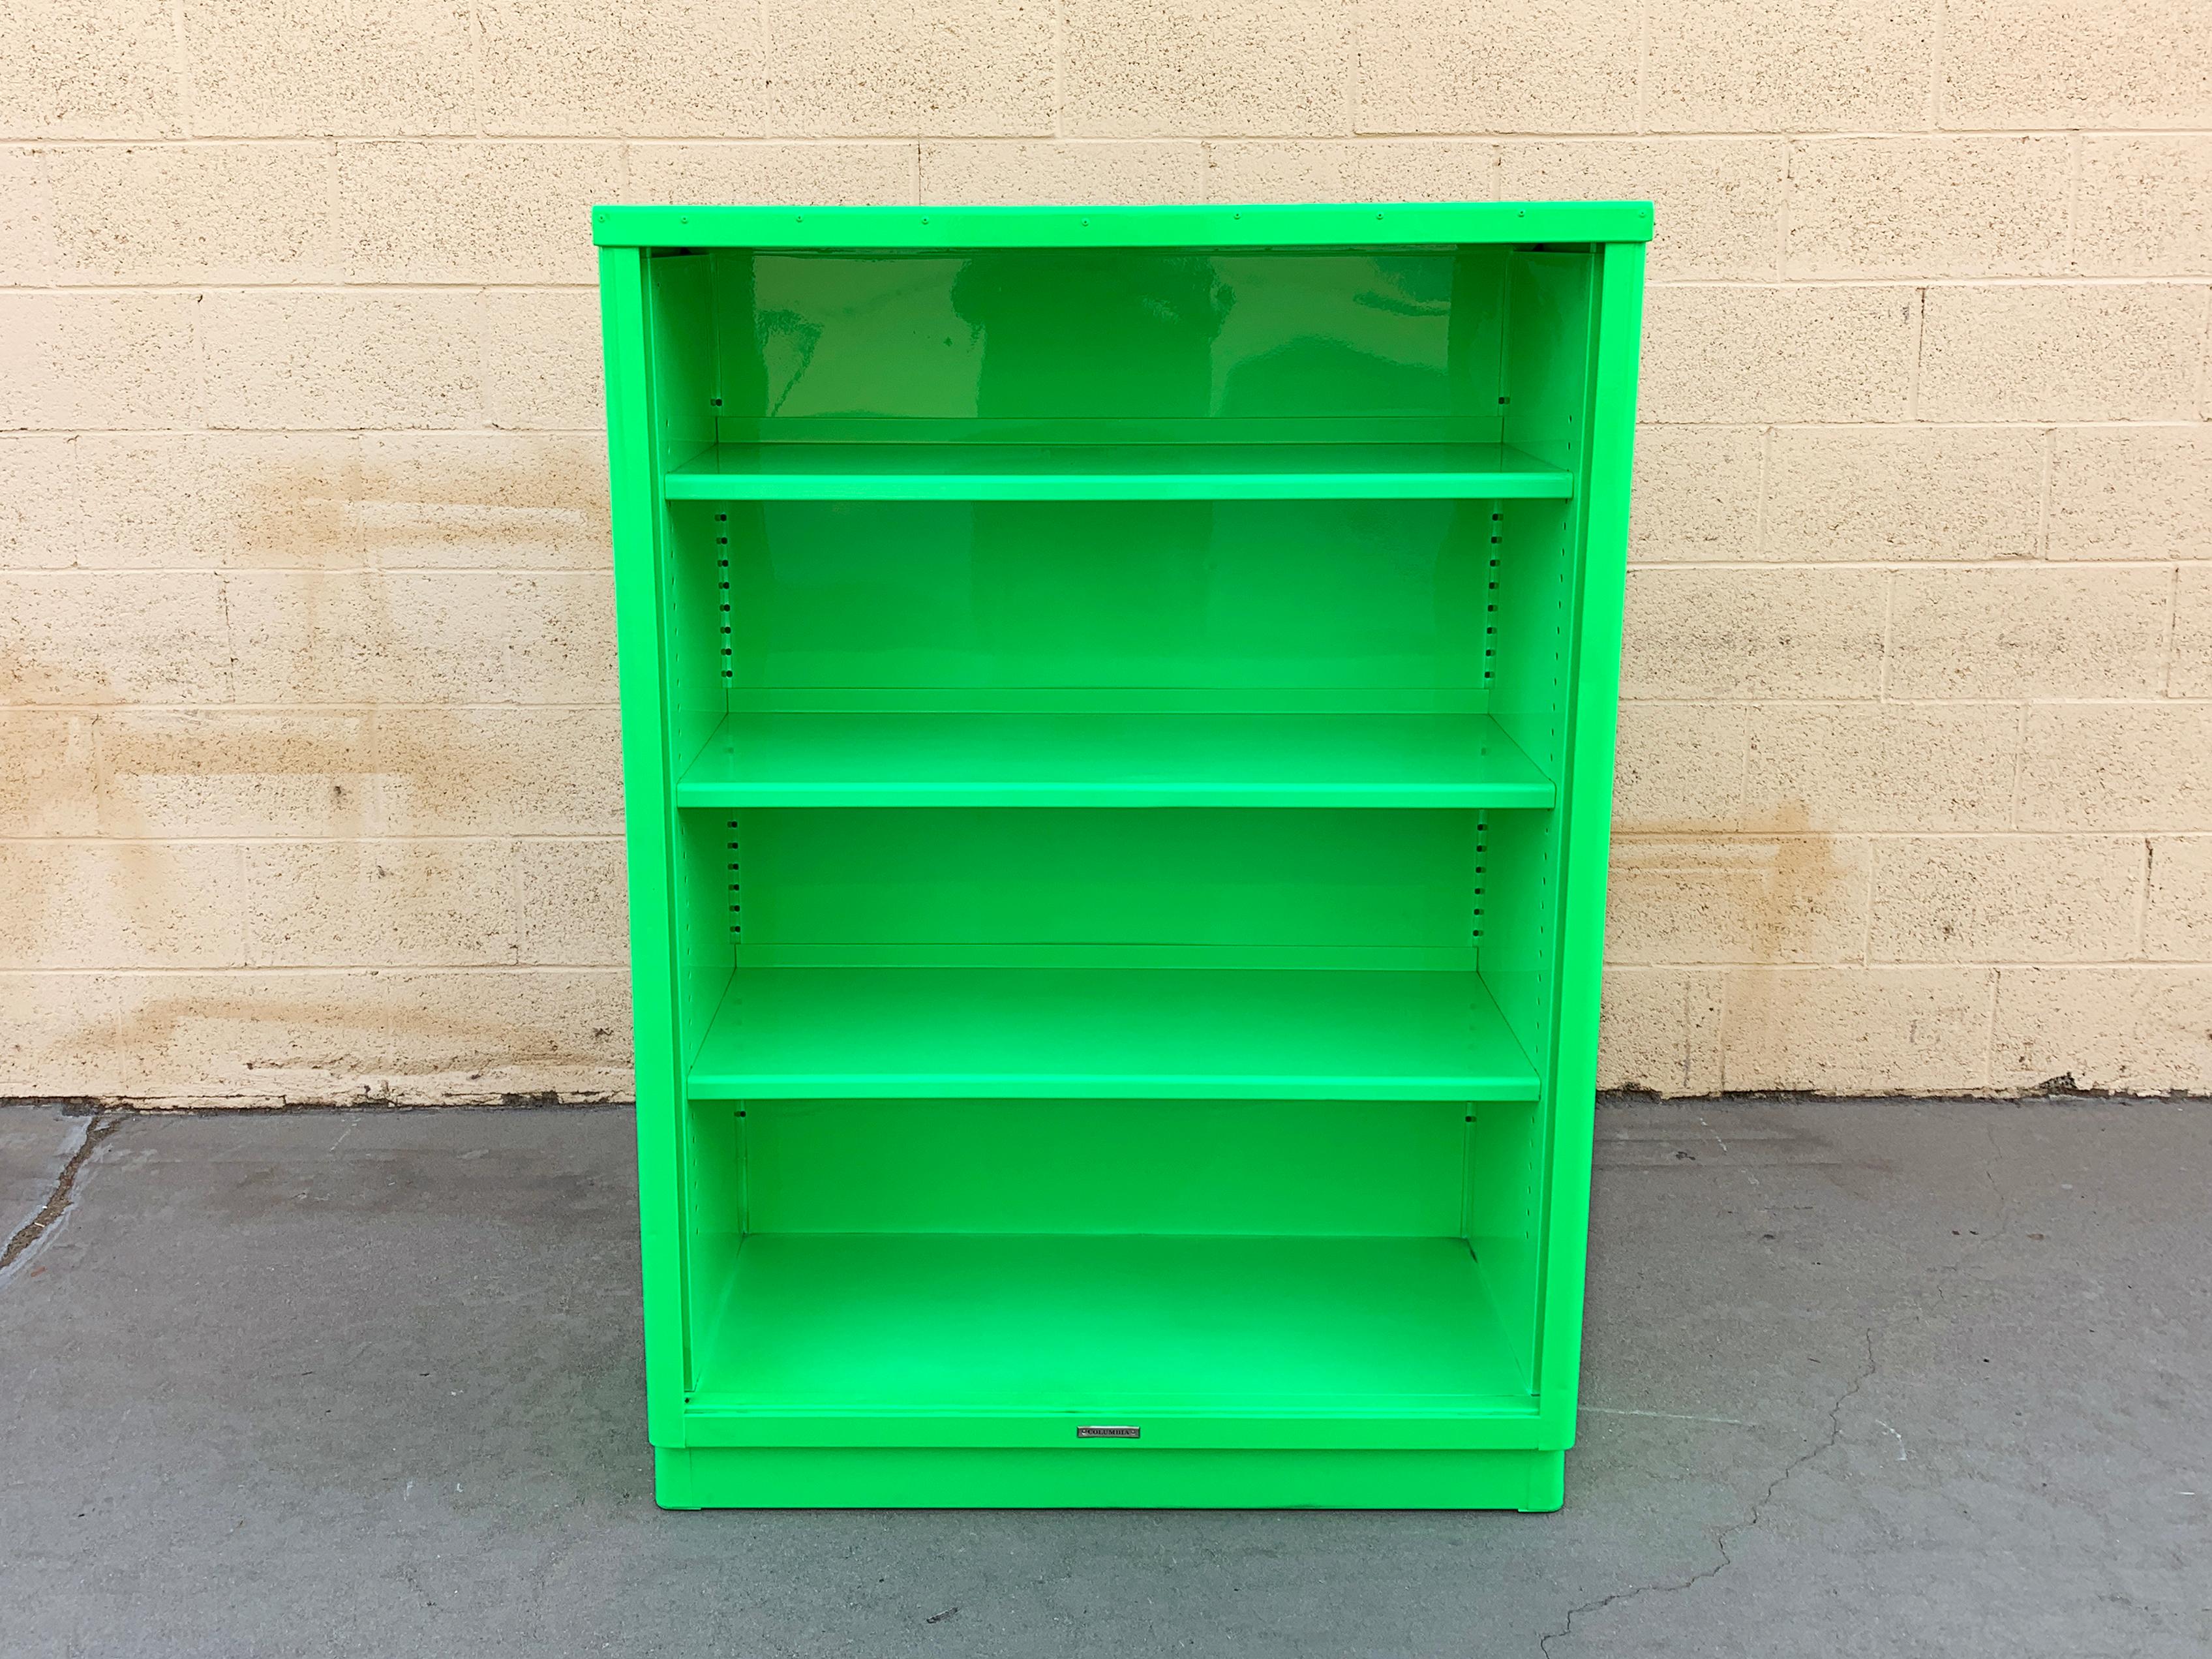 1960s tanker steel bookcase freshly powder coated in high Florence green. This adjustable 3-shelf unit is an excellent storage option– its sleek and compact, yet holds many books. Cool bookcase, perfect for storage and display.

Good vintage